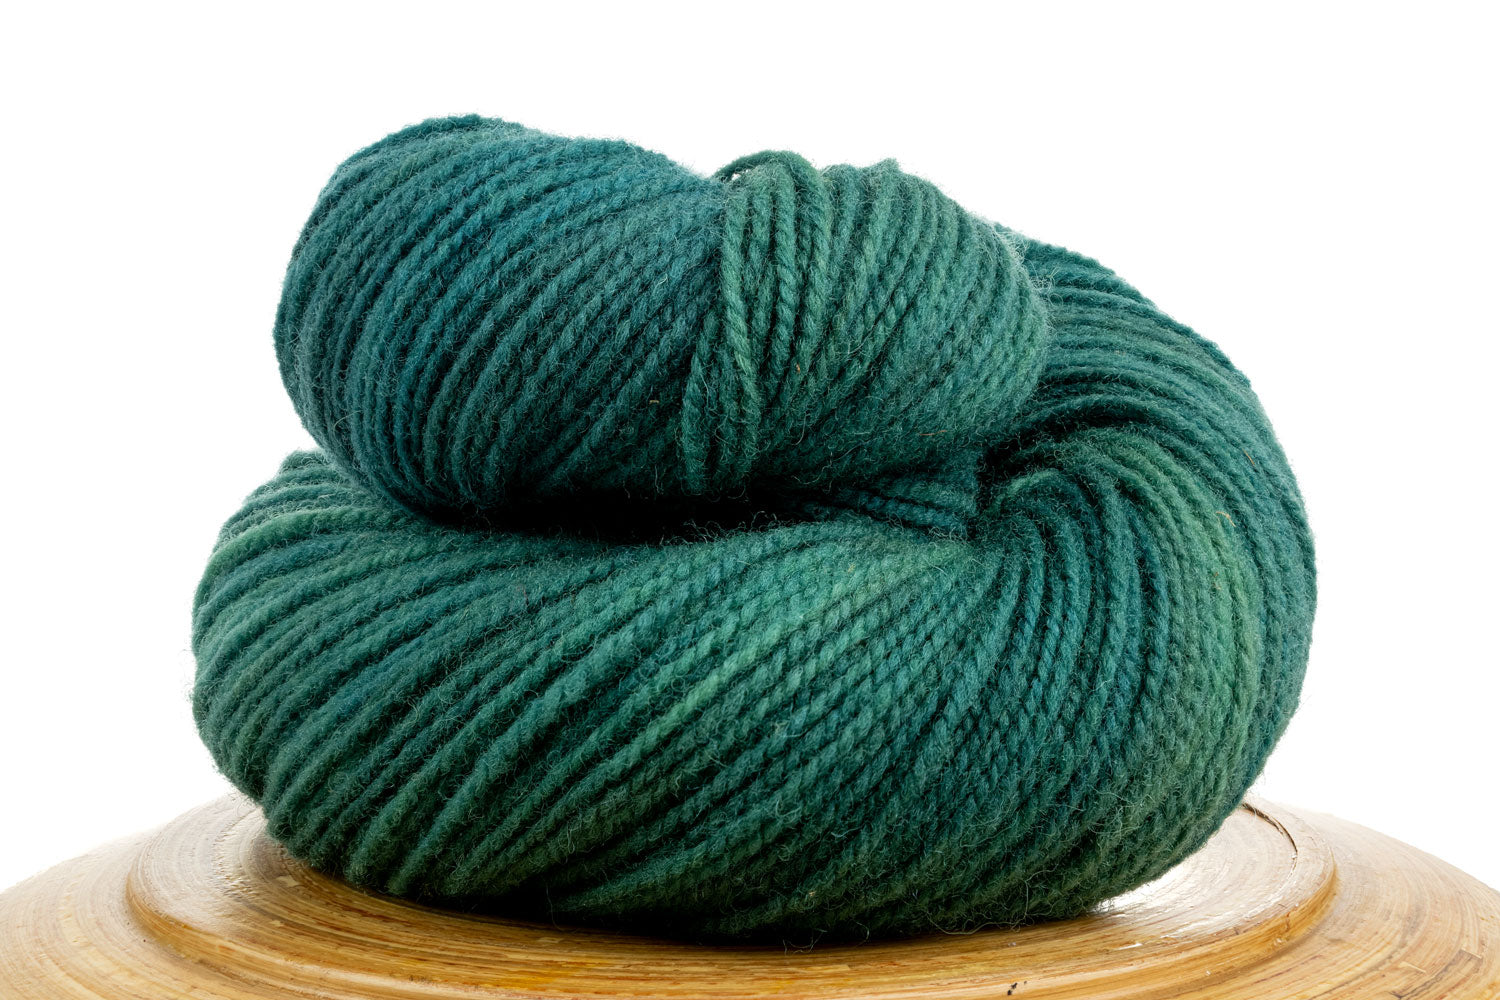 Winfield Canadian hand-dyed yarn in Early Morning Rain, a light blue-green